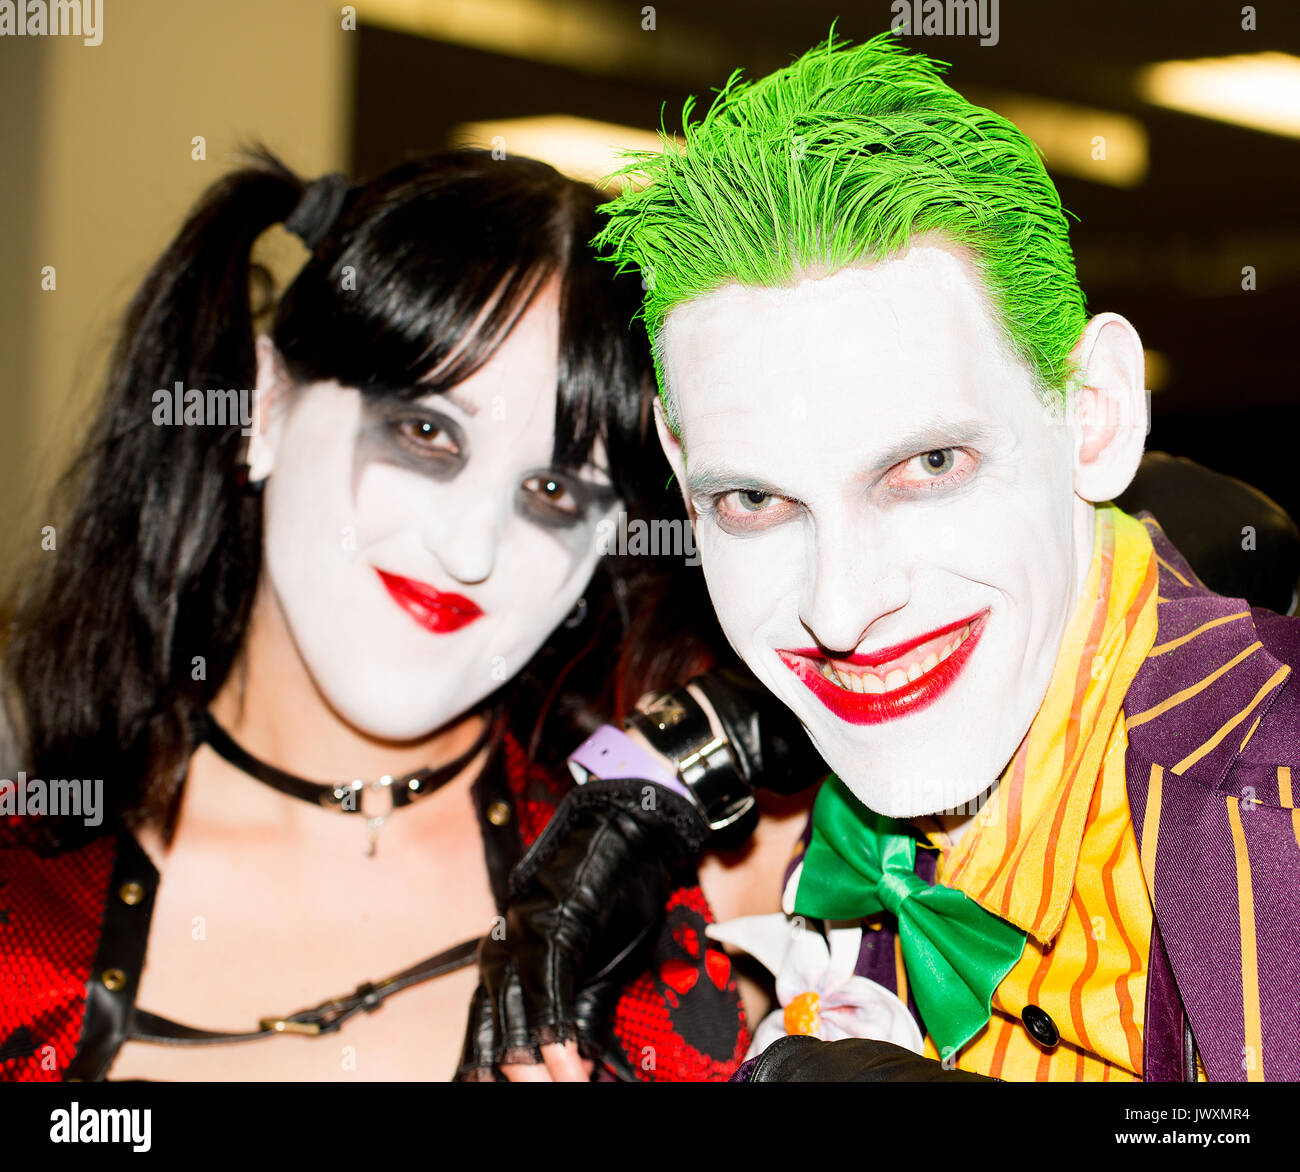 Couple dressed as Harley Quinn and The Joker from the Batman comics at the London Film & Comic Con 2017 (Press pass/permission obtained). Stock Photo